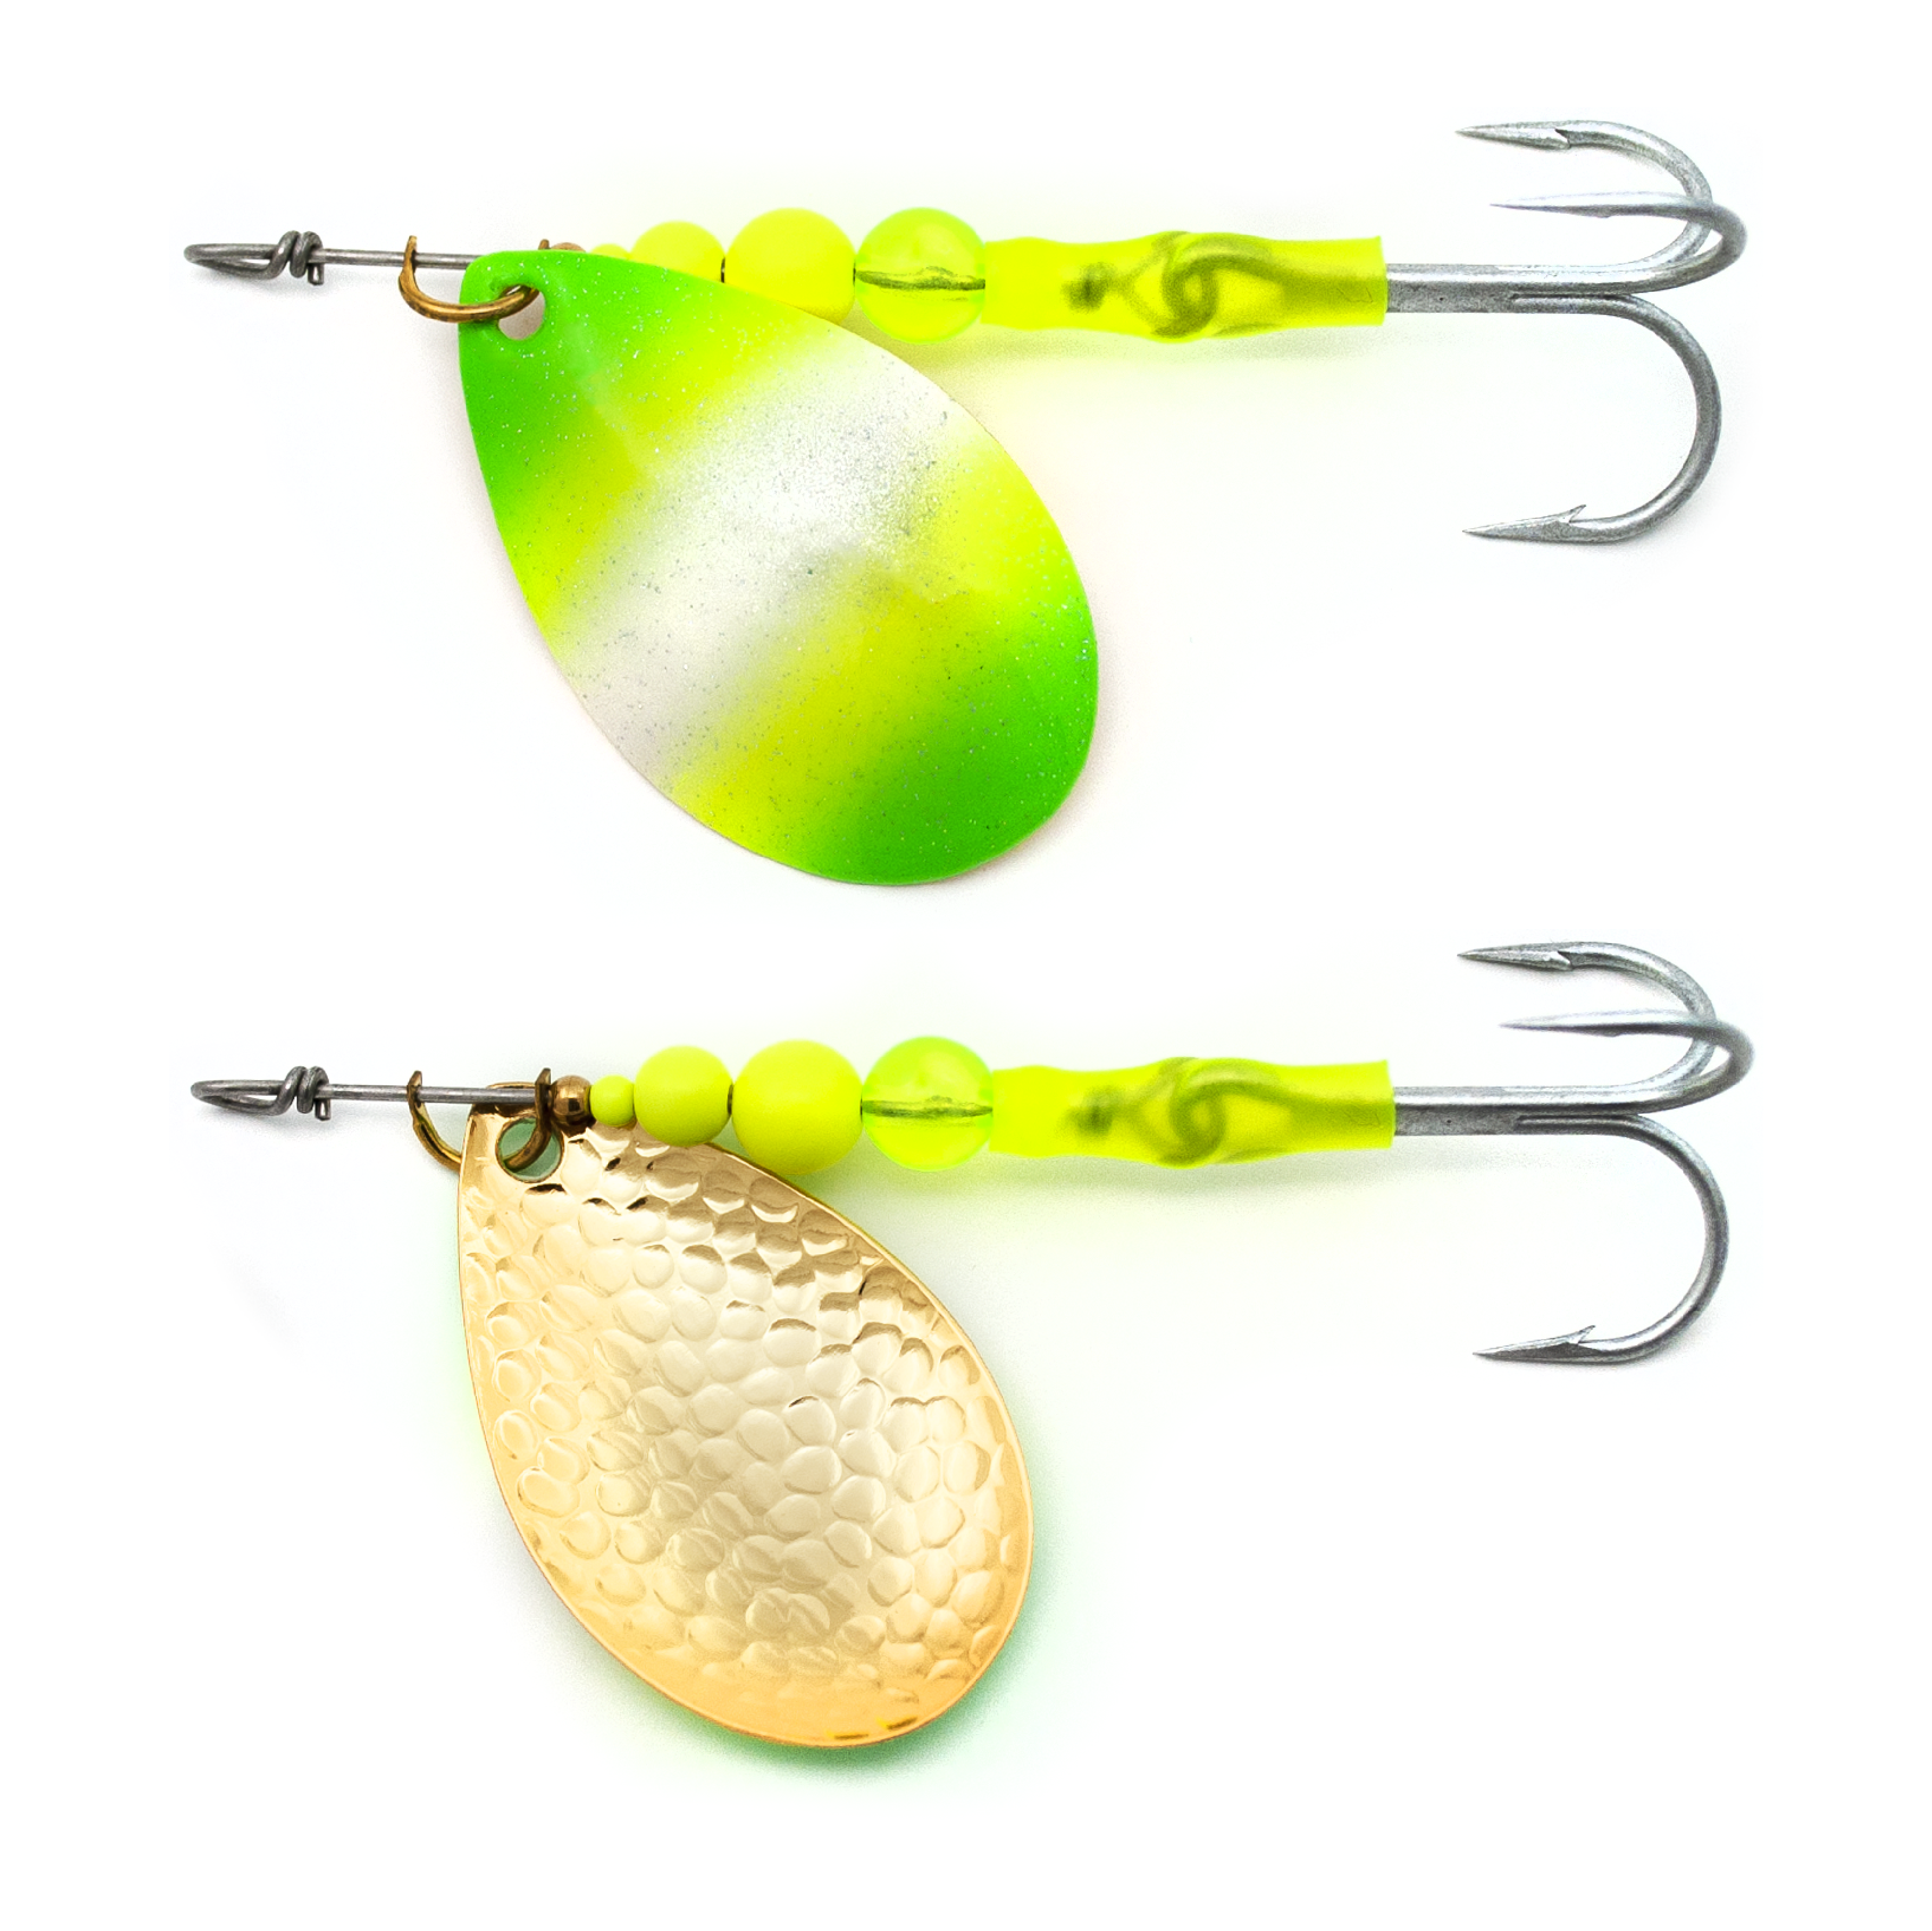 WH 13 PCS Fishing Lure Trout spinners, Bass Trout Salmon Hard